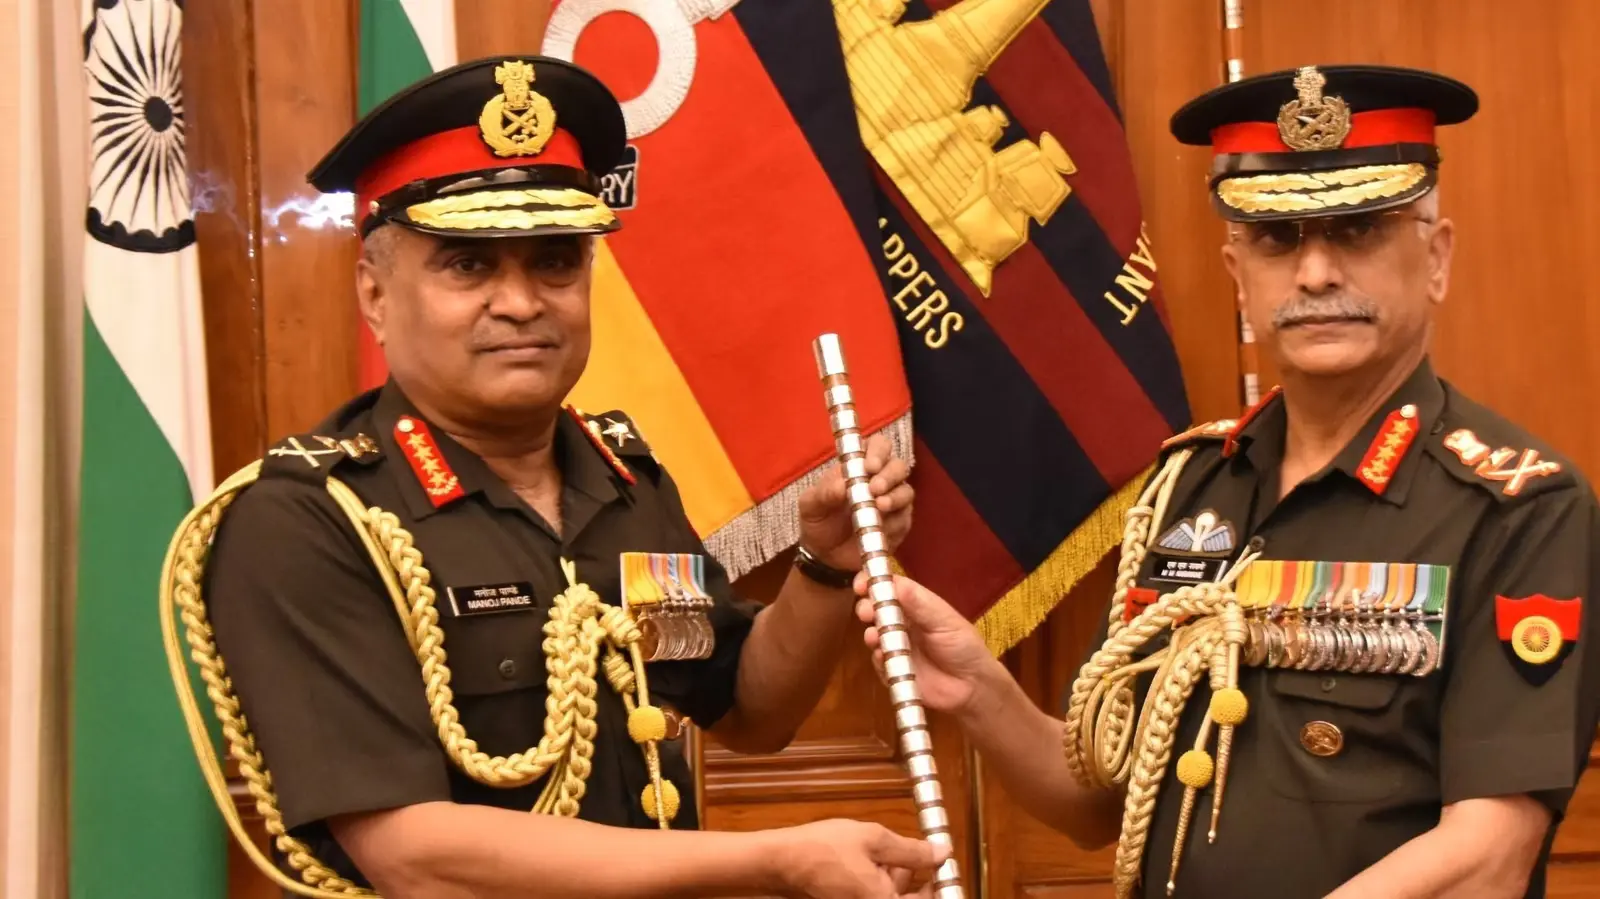 'India's stature increased in the world due to the determination of the armed forces during the Ladakh conflict', said Army Chief General Pandey